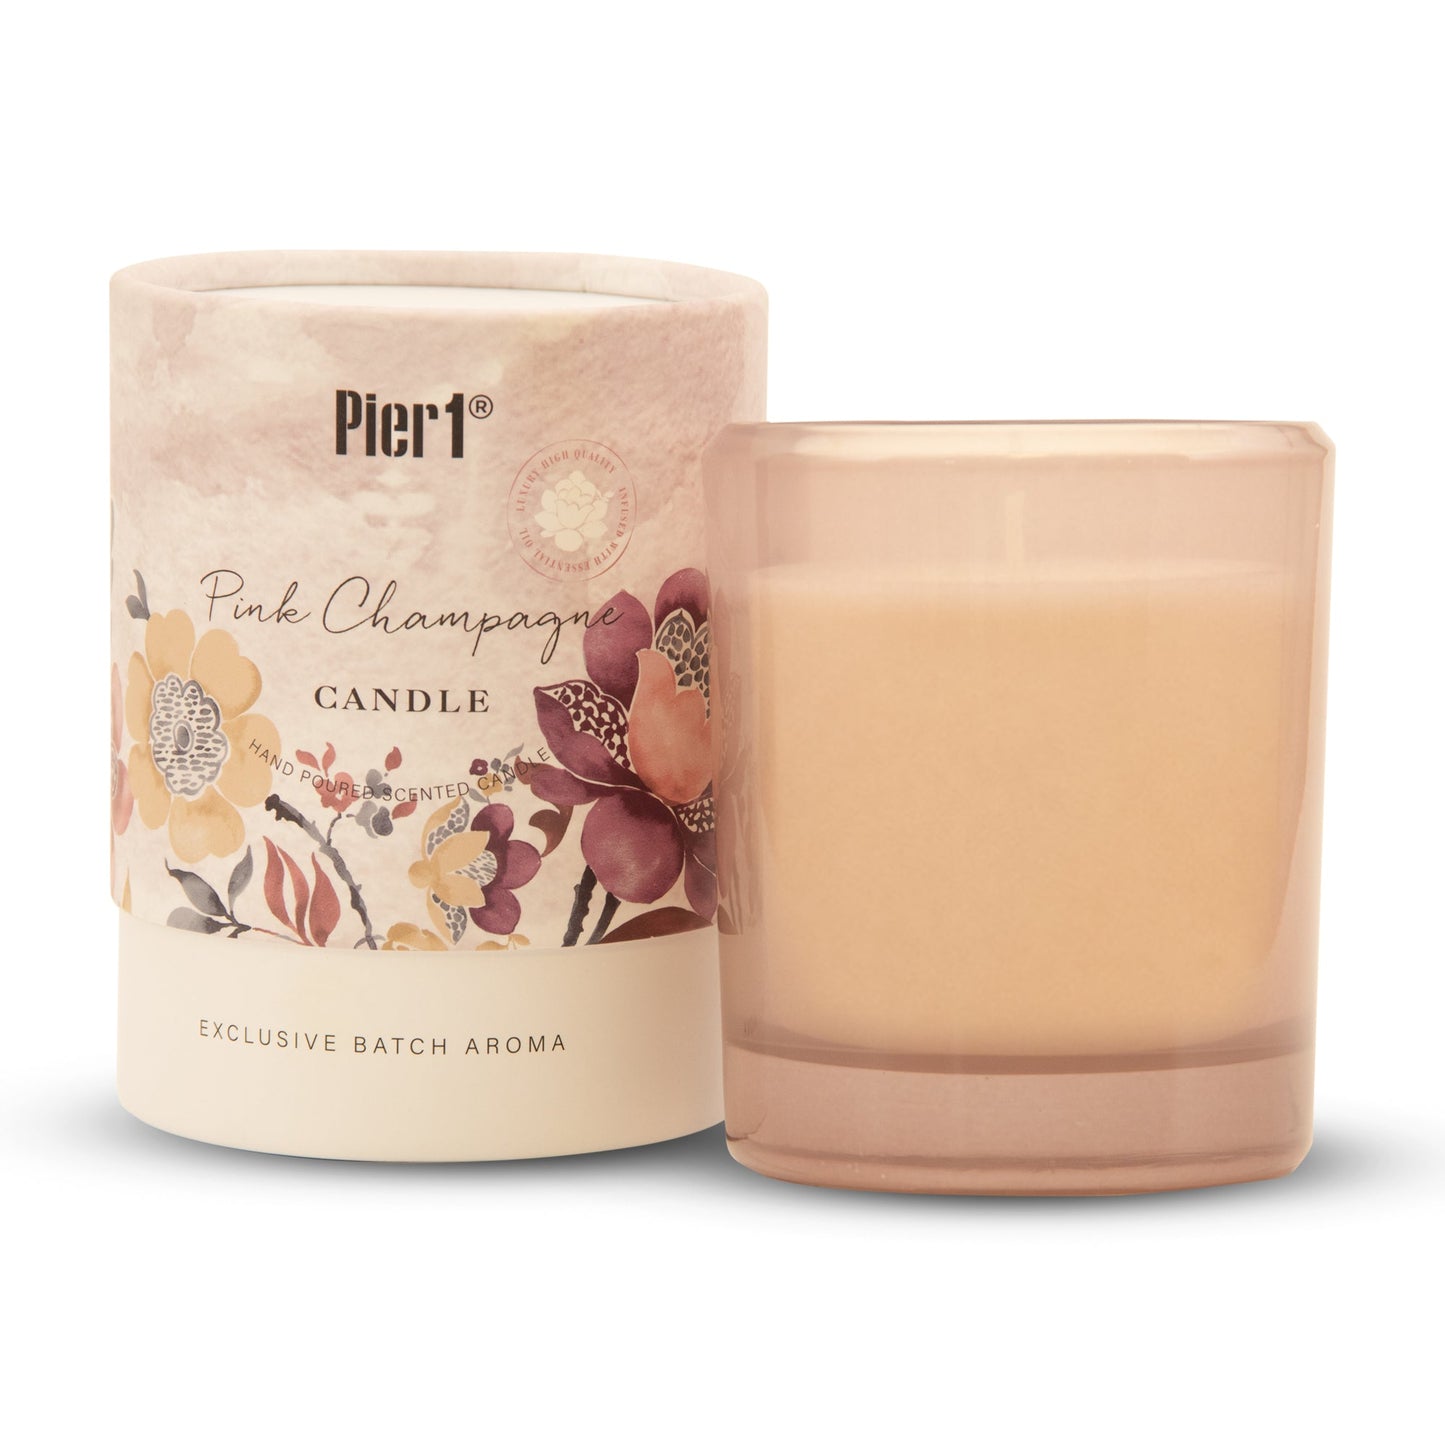 Pier 1 Pink Champagne 8oz Boxed Soy Candle - The Home Resolution